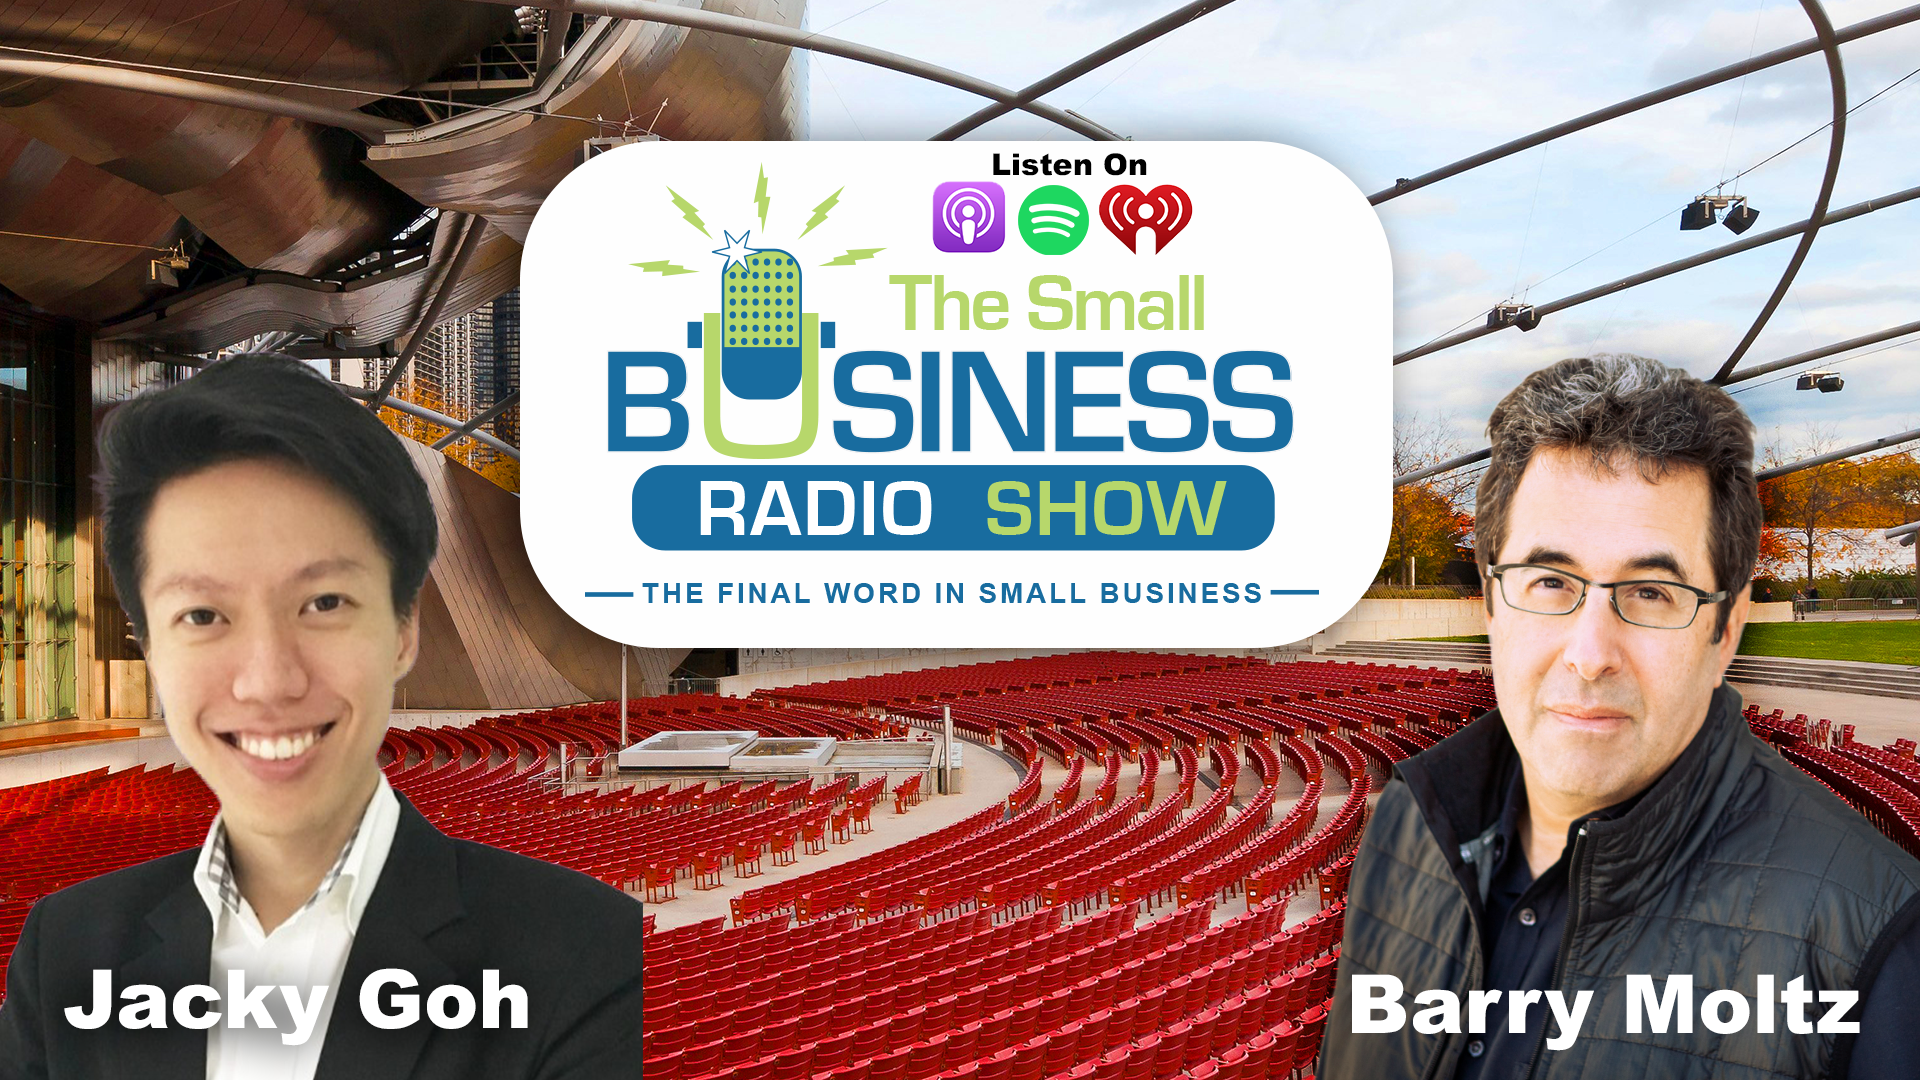 Jacky Goh on The Small Business Radio Show